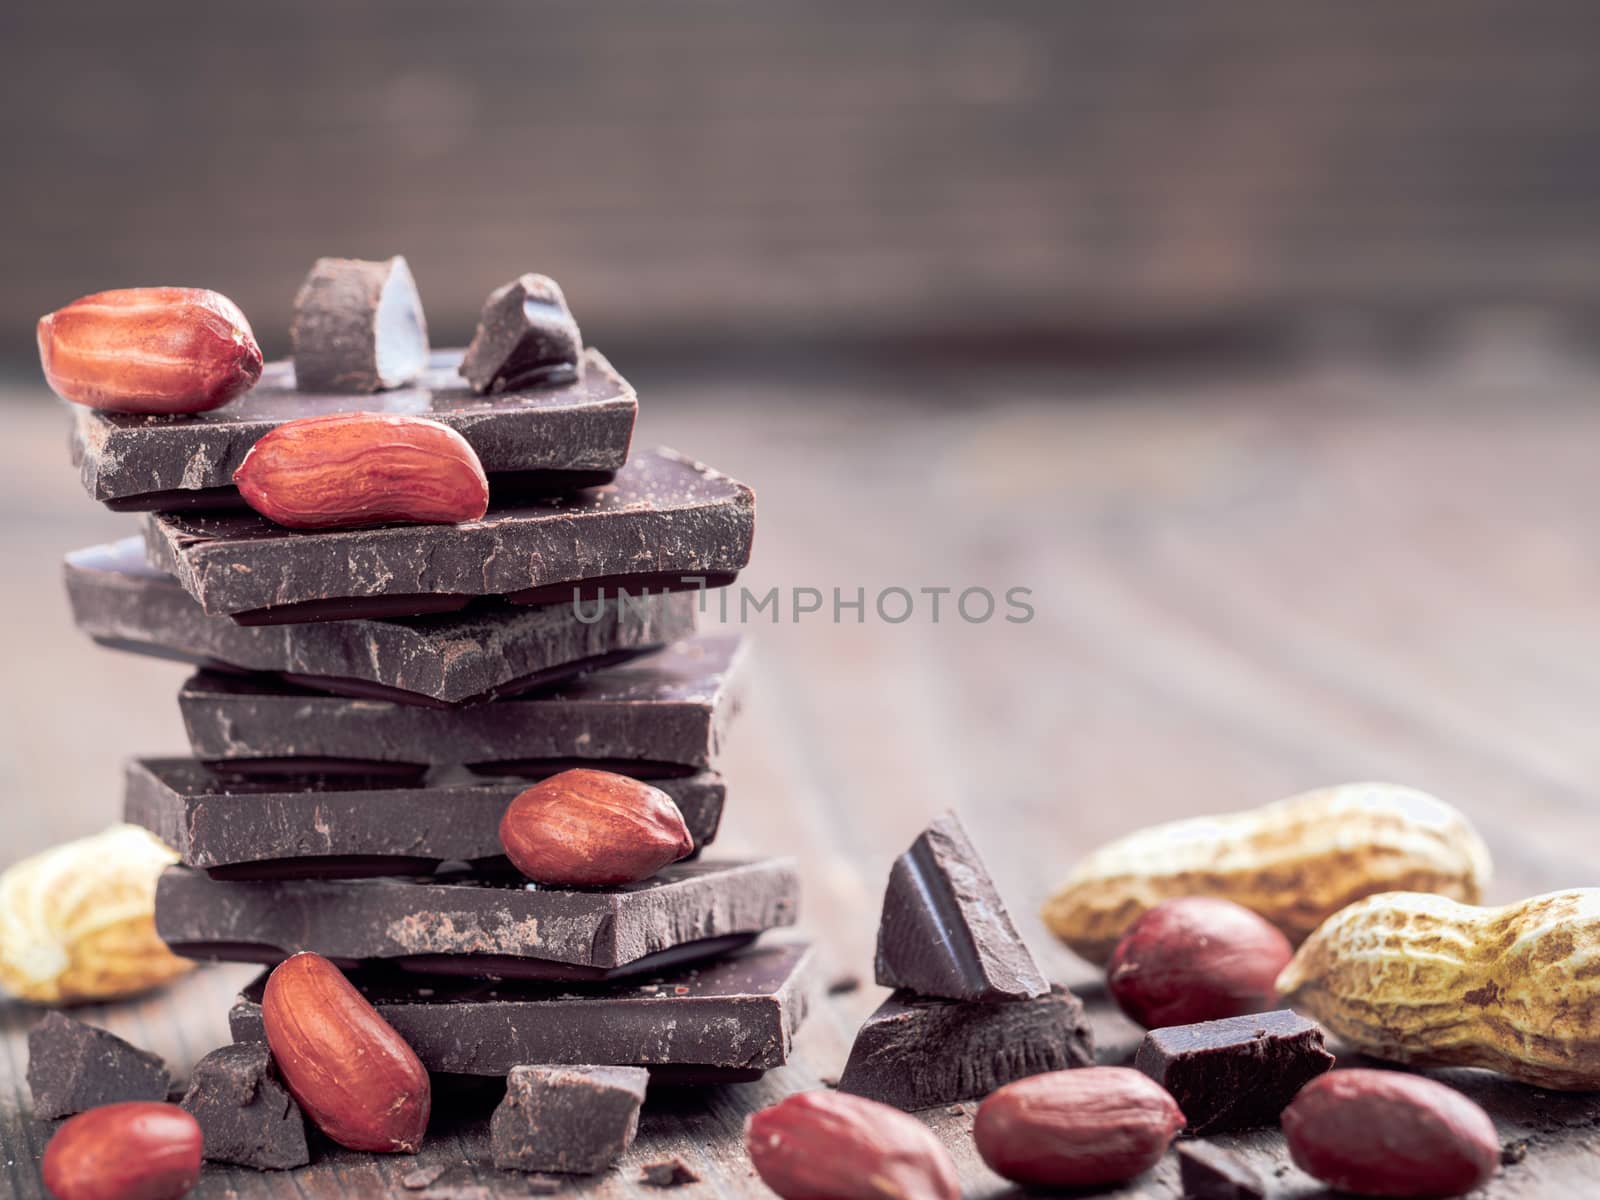 Stack of dark chocolate and peanut with copy space. Chocolate with crumbs and peanuts on wooden background.